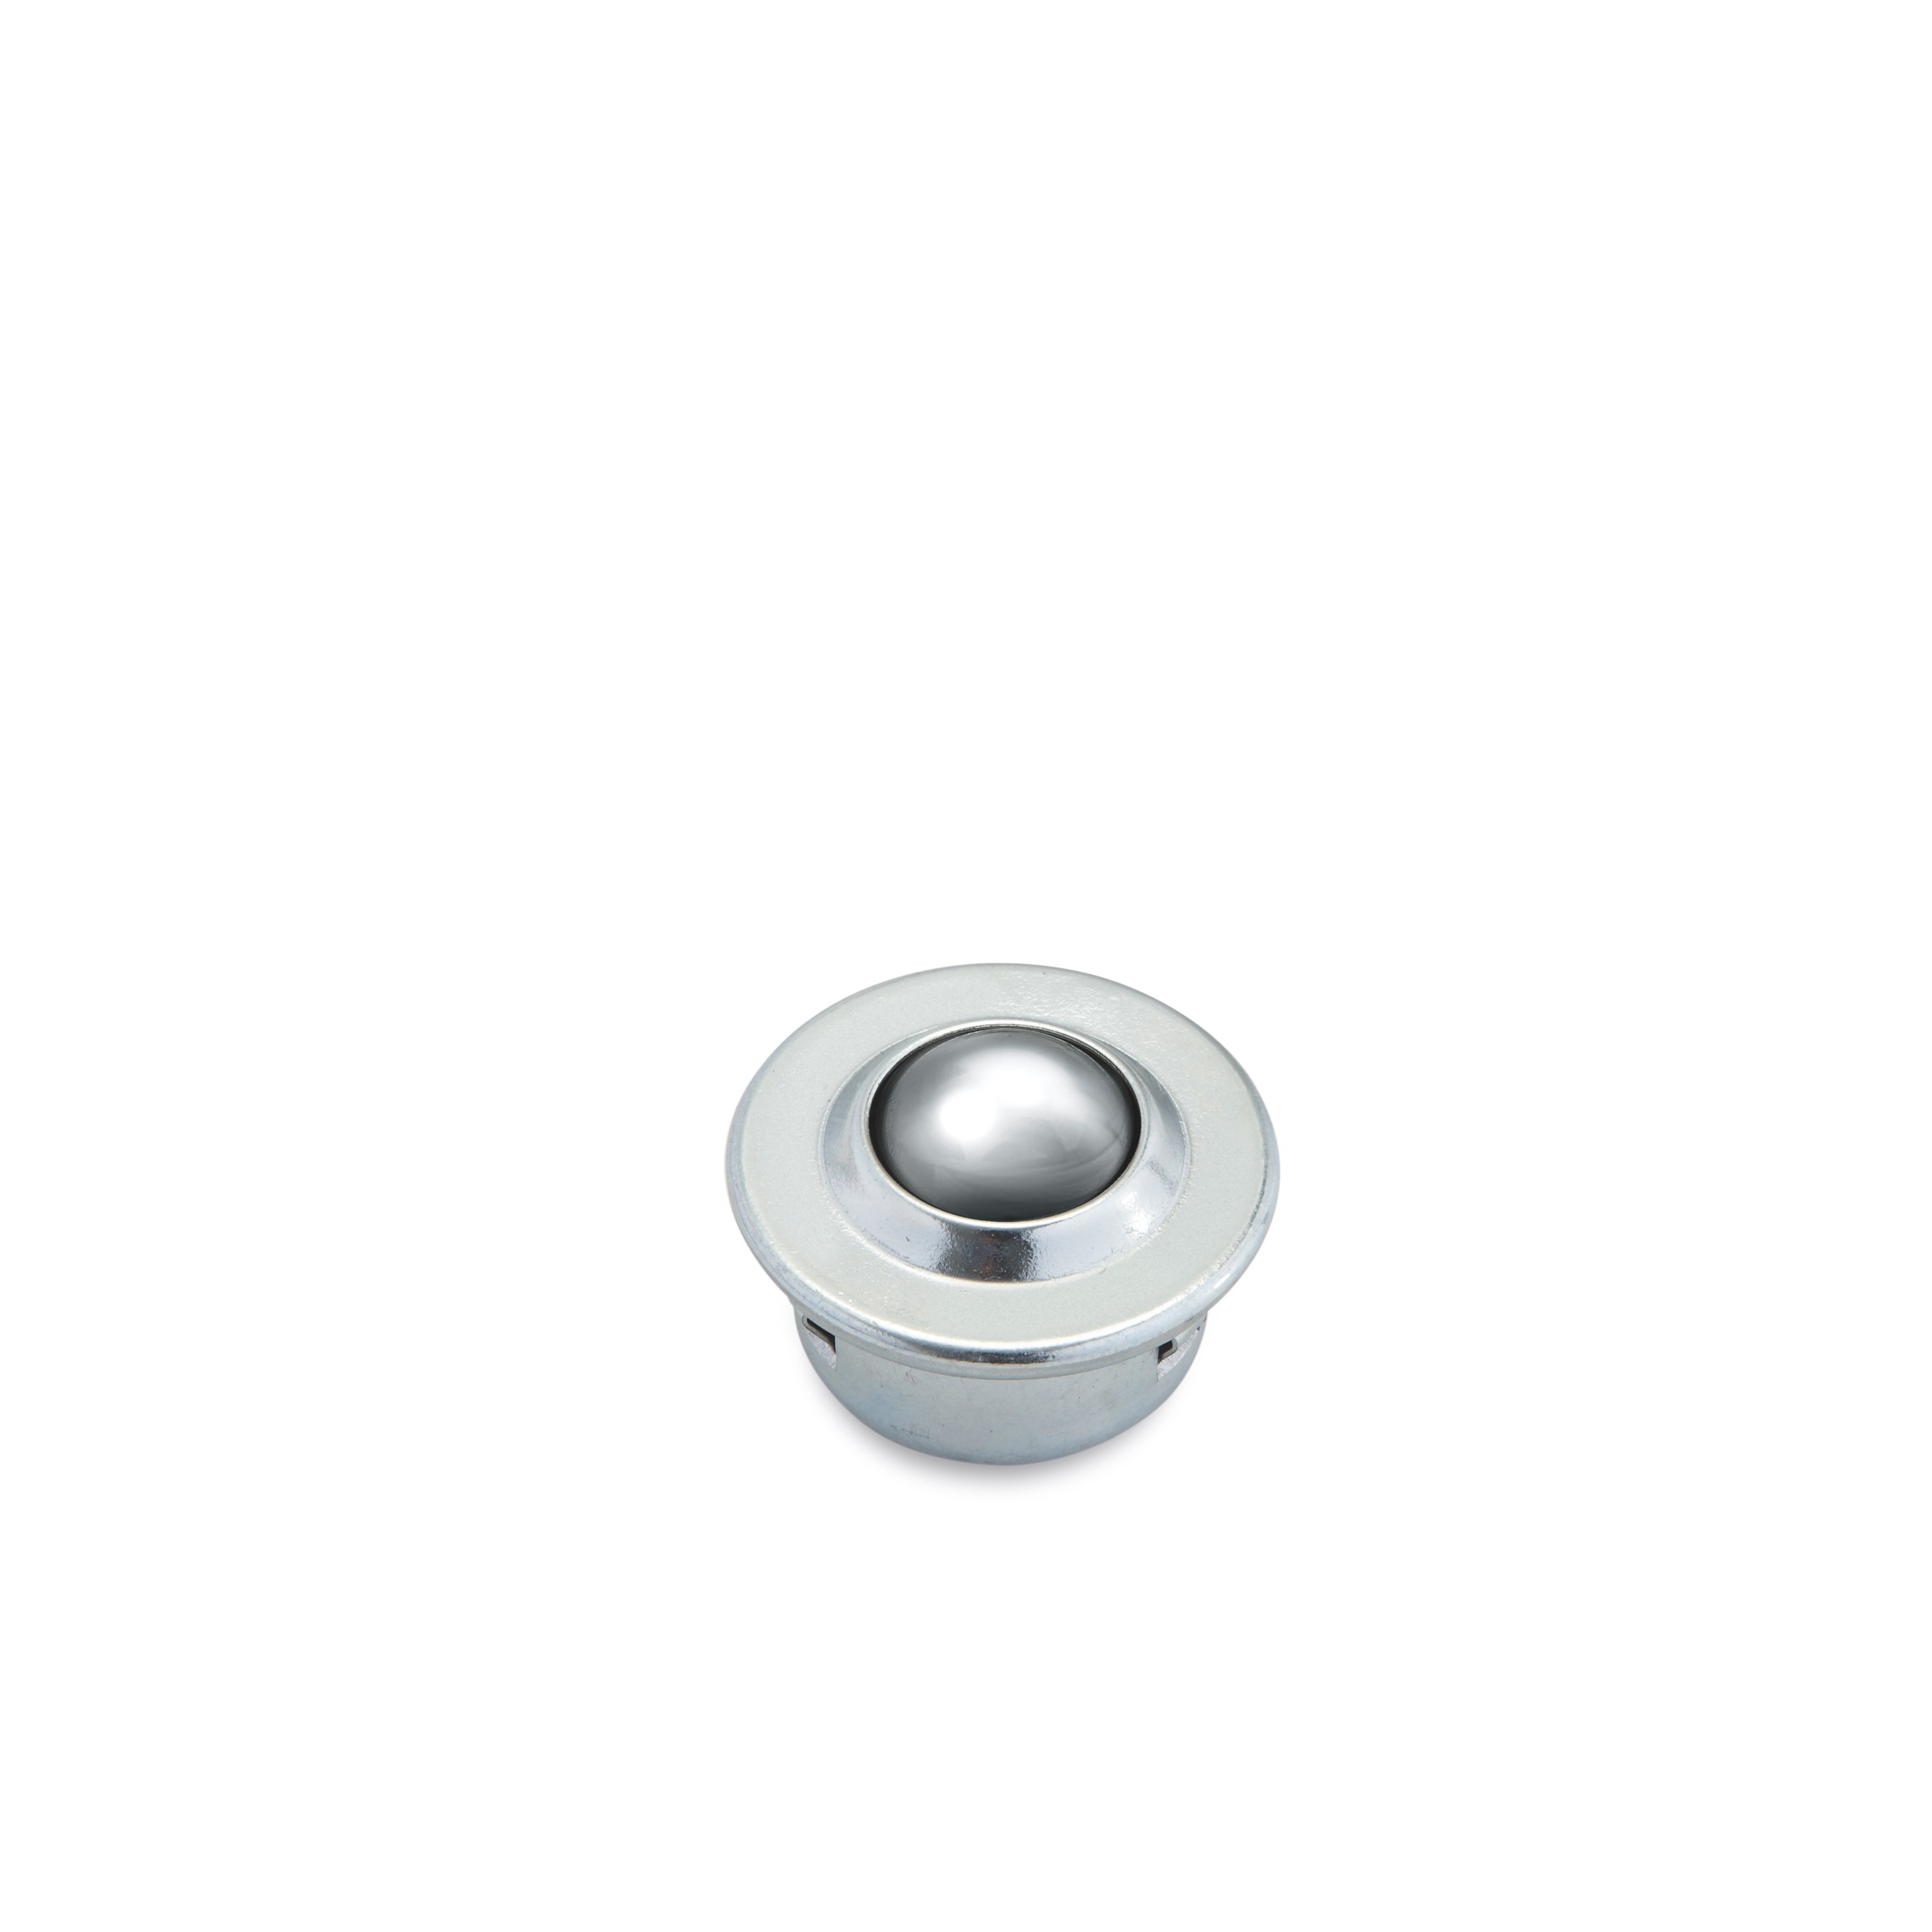 Ball roller with housing made of sheet steel, with clip